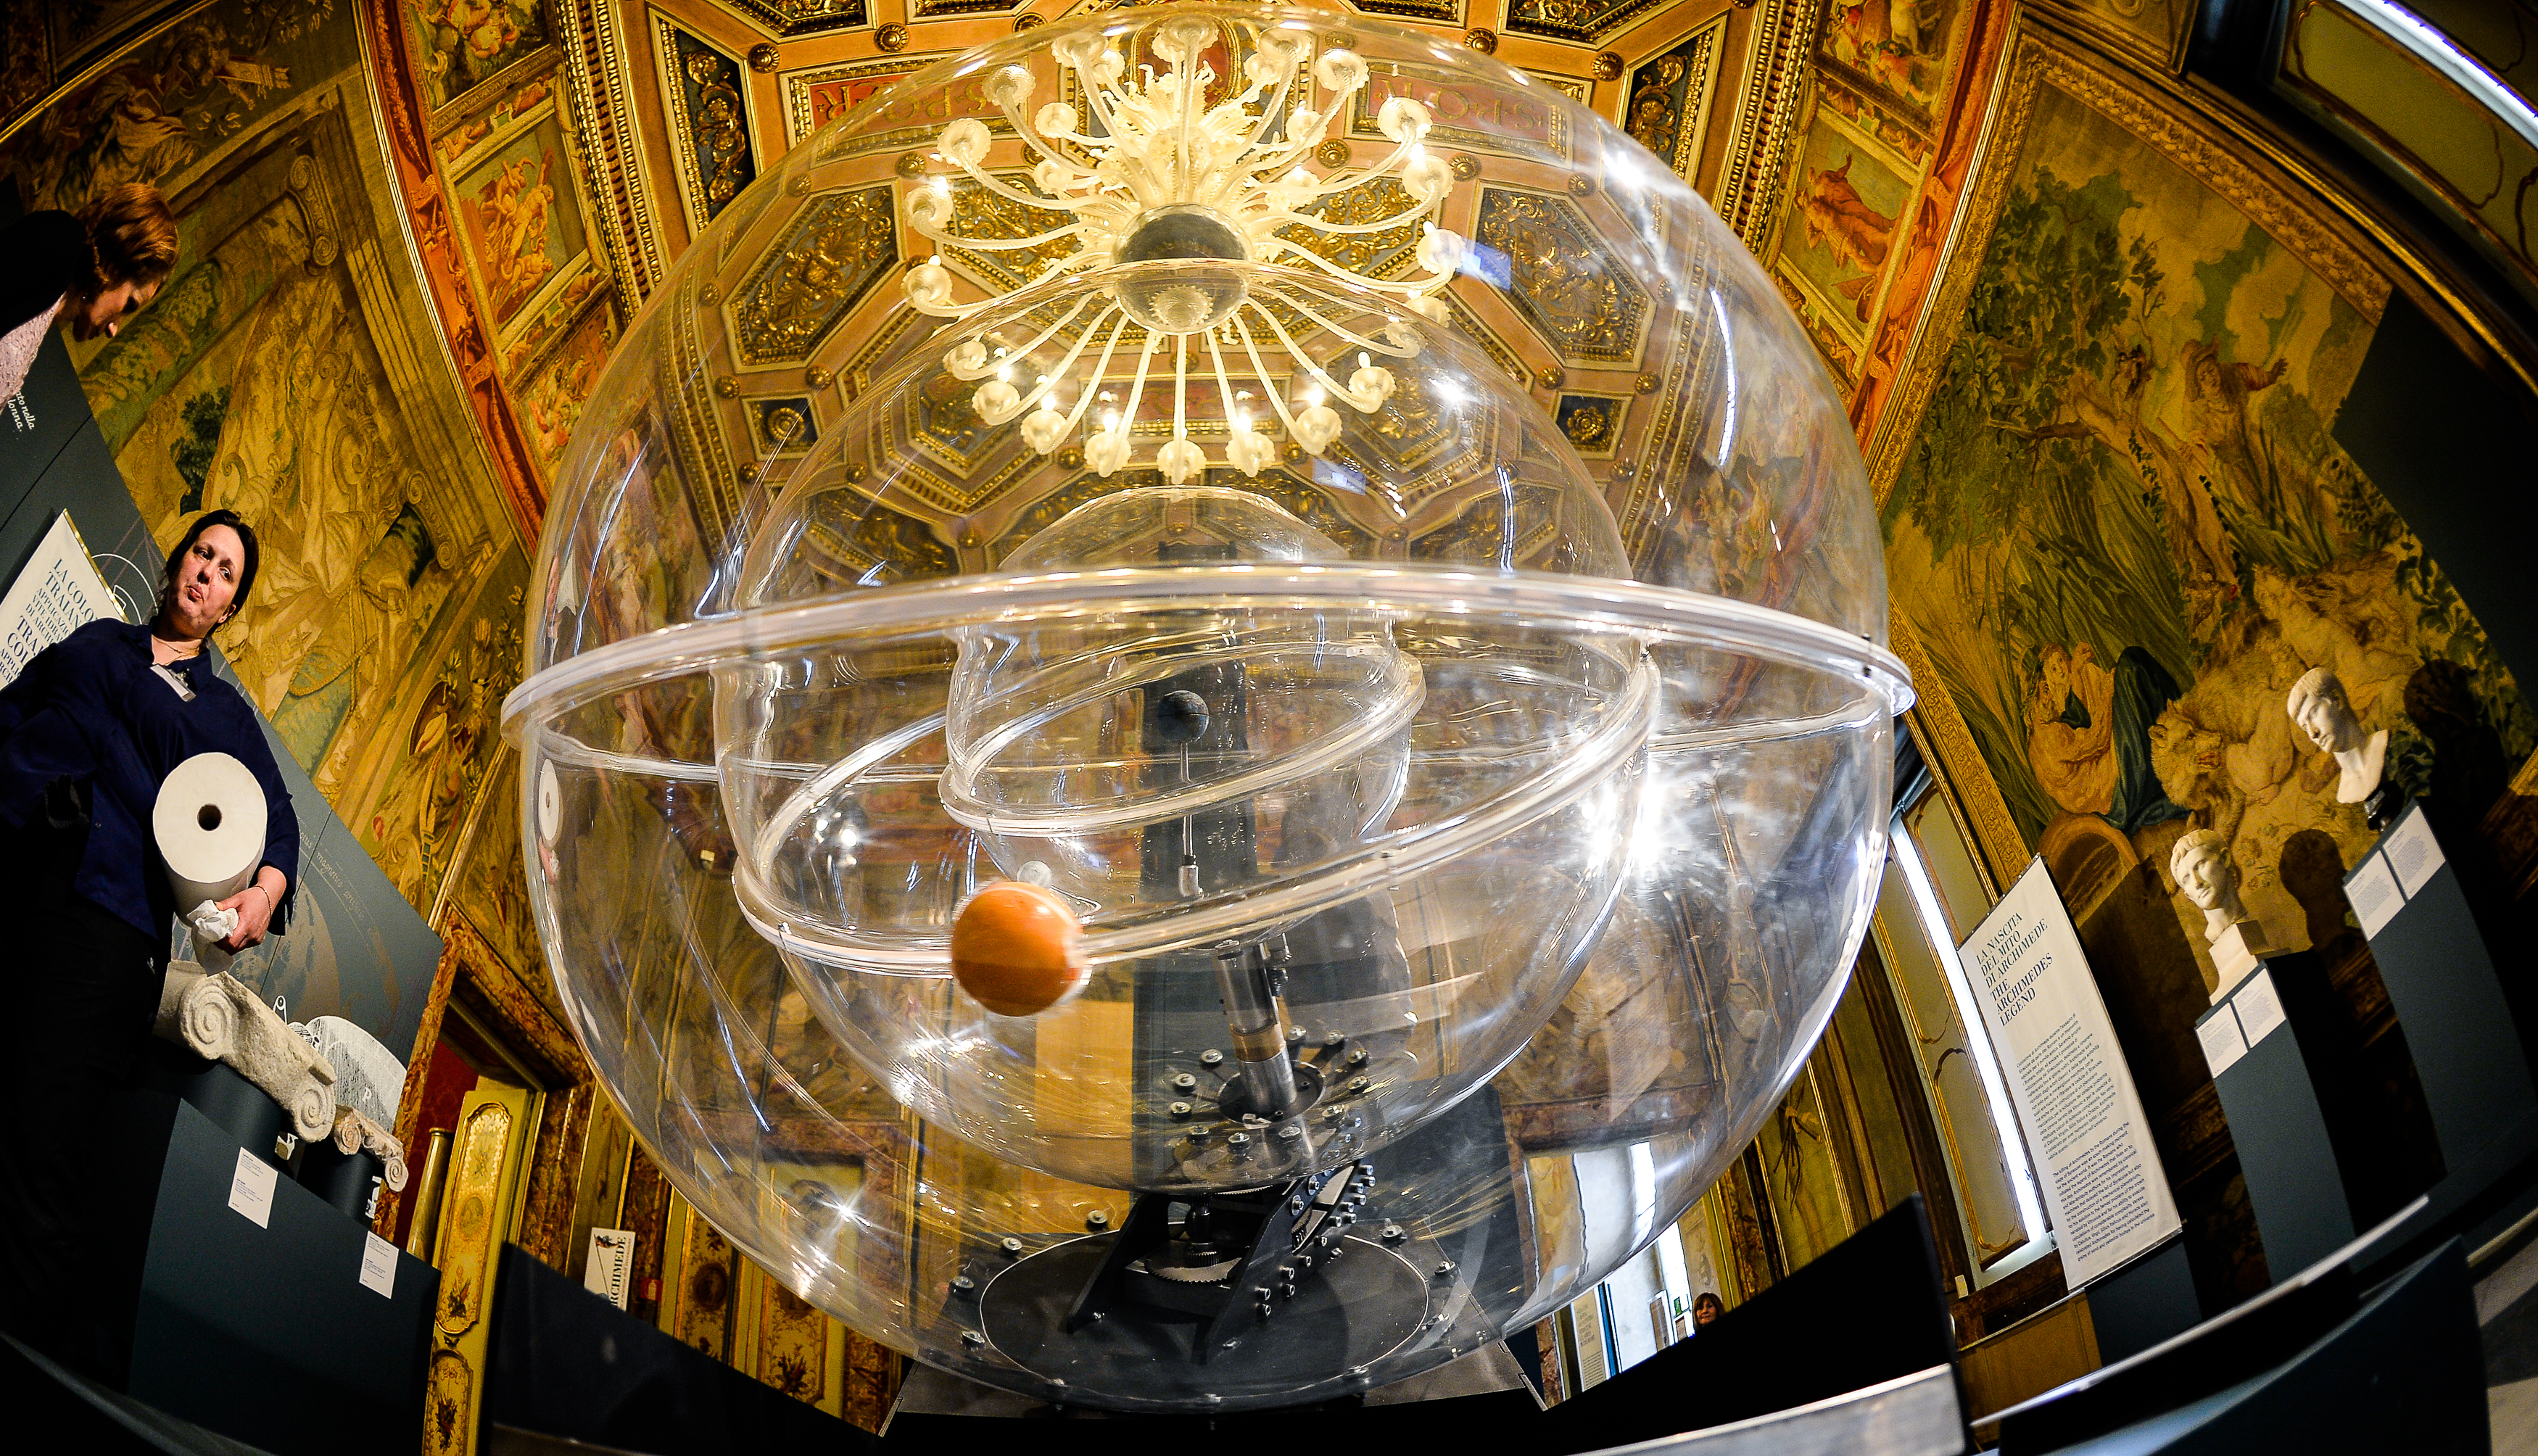 A replica of Archimedes’s planetarium in Capitoline Museums, Rome